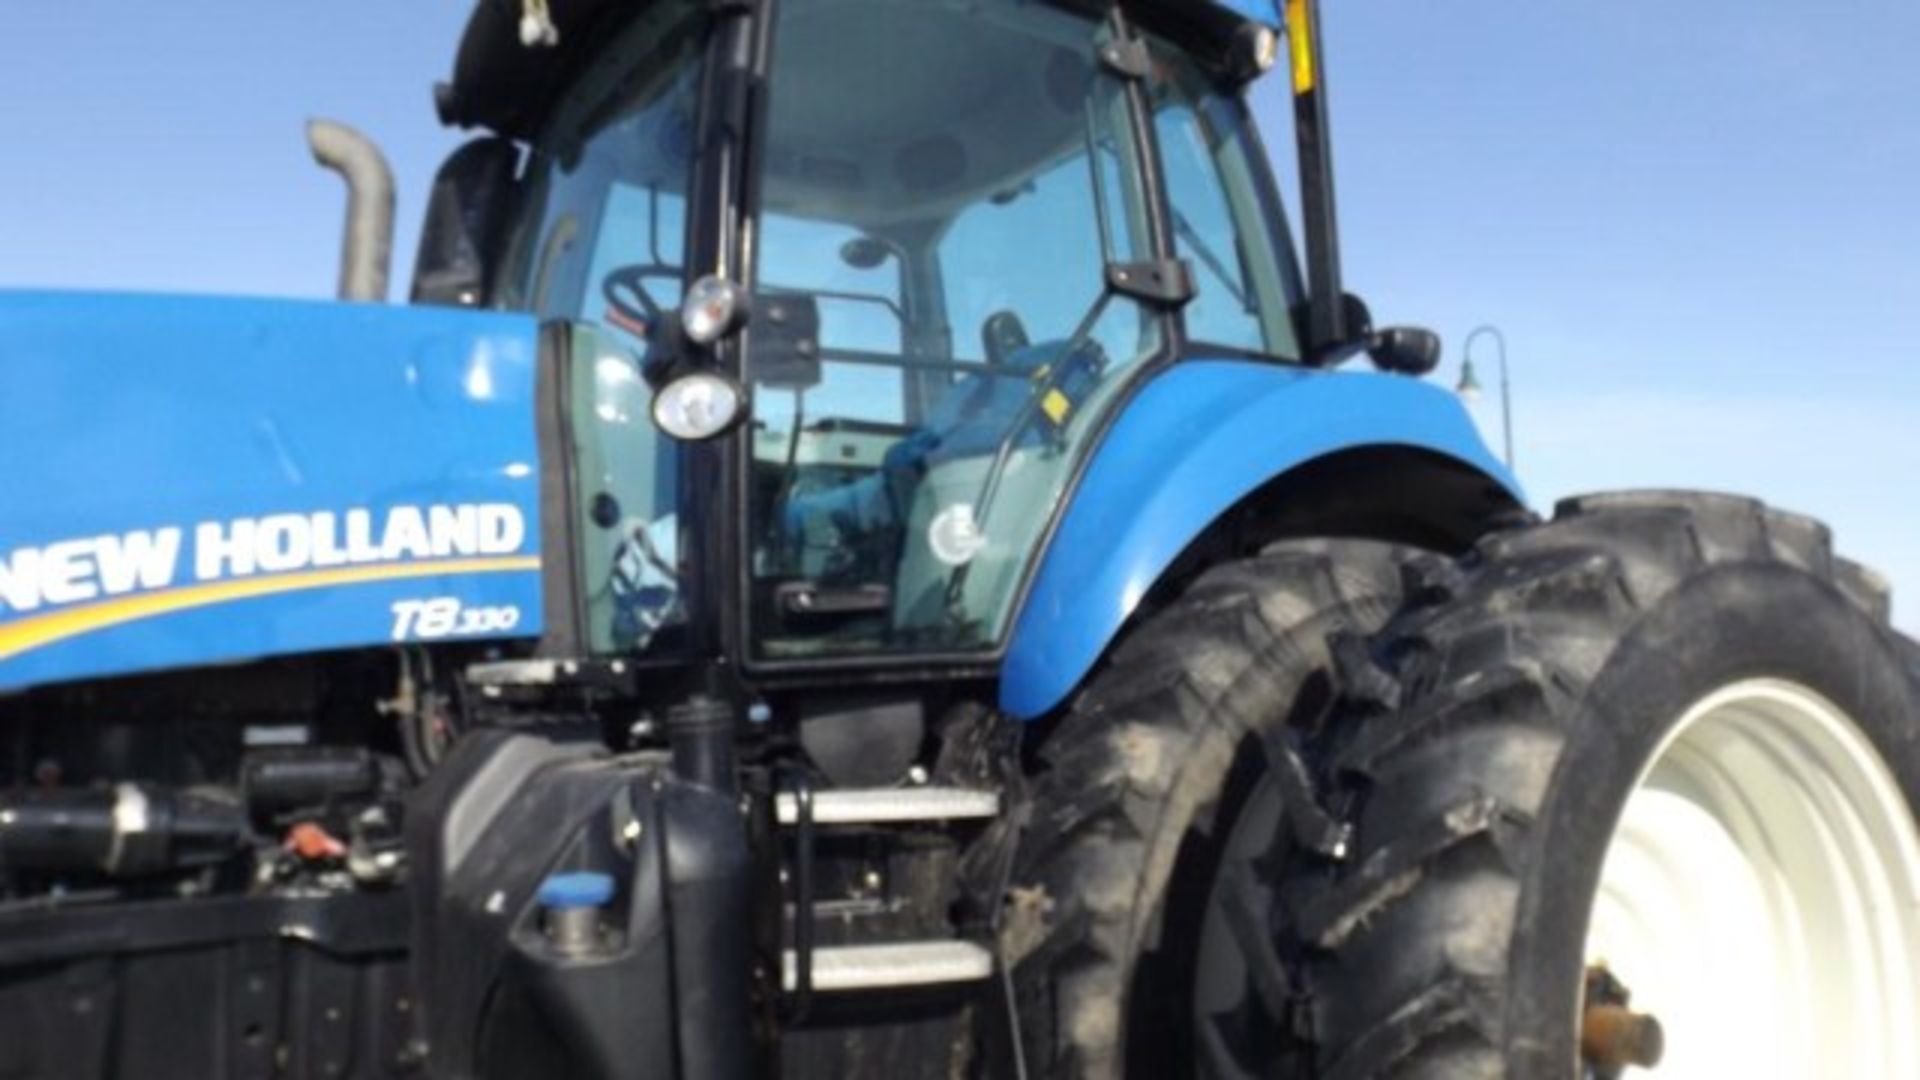 New Holland T8.330 Tractor '12, sn#ZBRC08592 1192 Hrs, MFWD, Deluxe Cab, Buddy Seat, 280 HP, 18/4 - Image 5 of 19